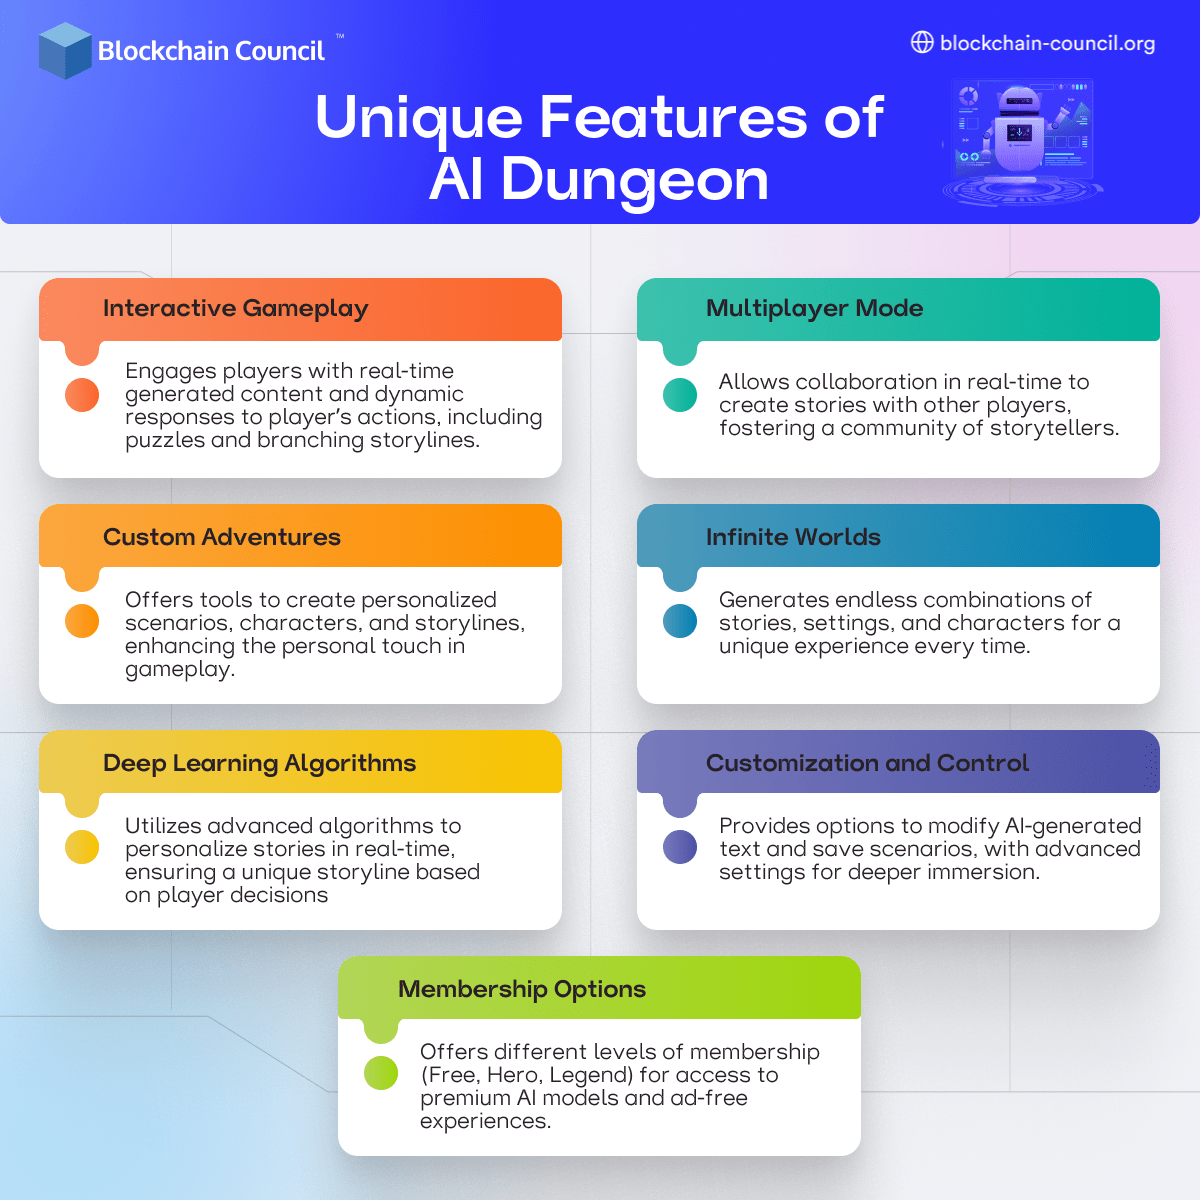 Unique Features of AI Dungeon